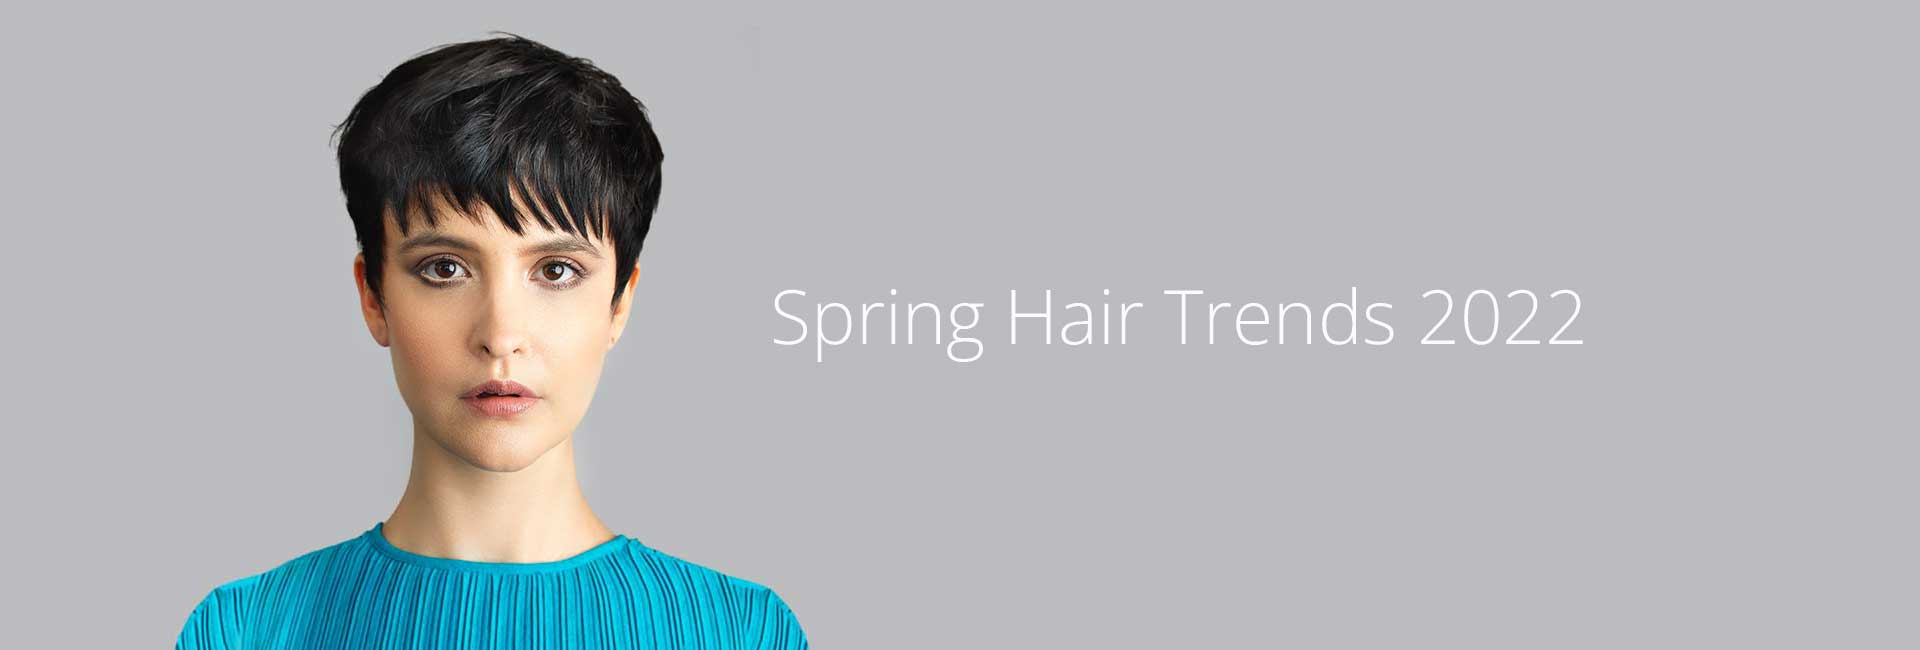 Spring Hair Trends 2022, Contemporary Salons, North East